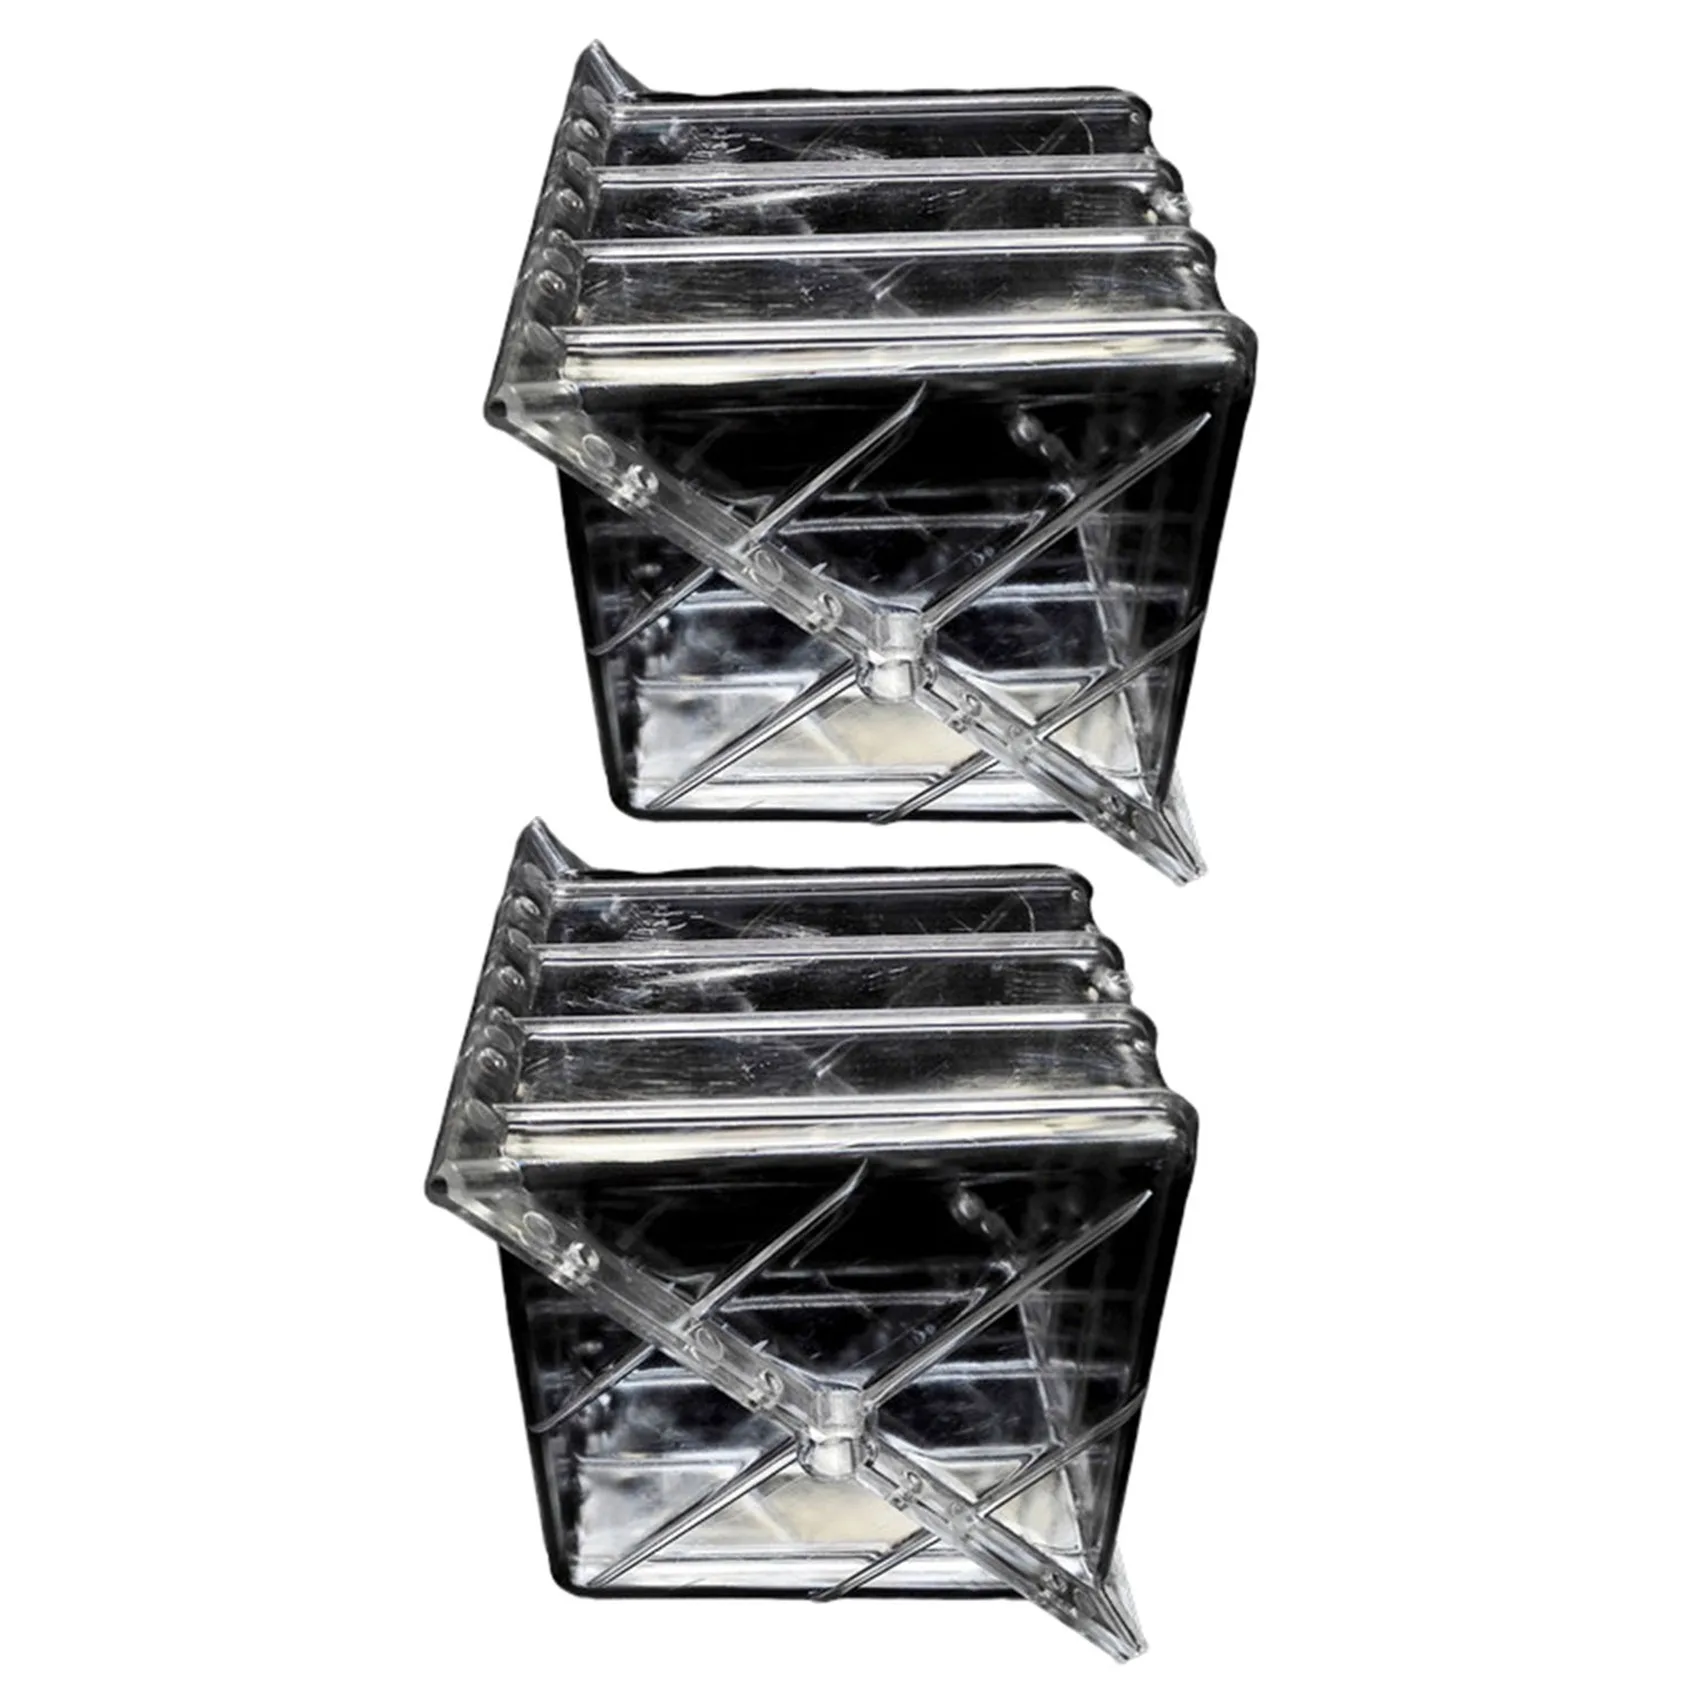 

2X Big Size Plastic Clear Heart Square Watermelon Growing Mold Transparent Fruit Growth Forming Shaping Mould